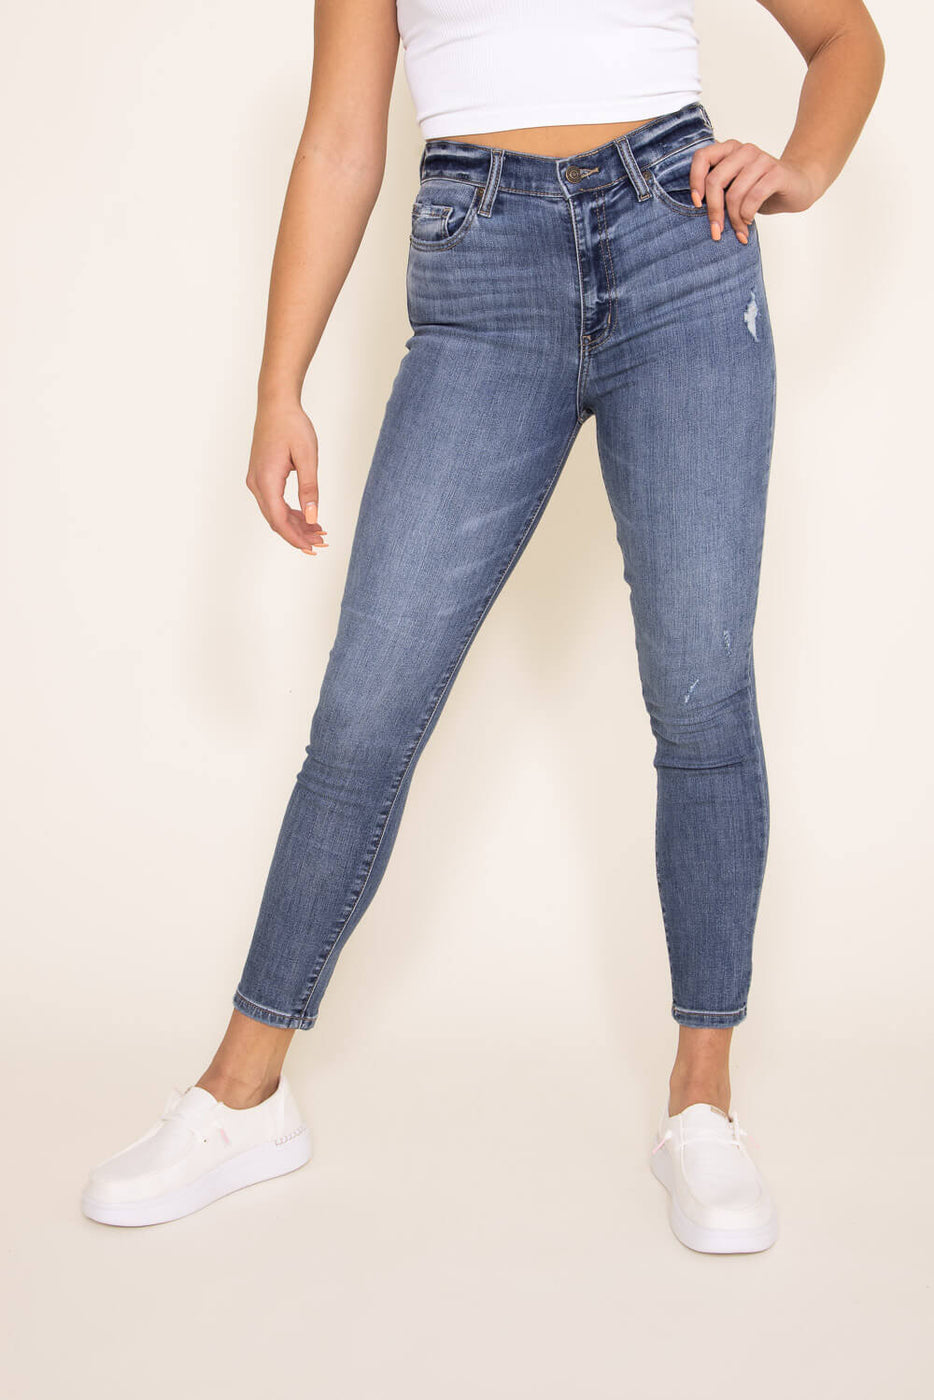 Buy Amelia Mid Rise Slim Ankle Jeans for USD 44.00